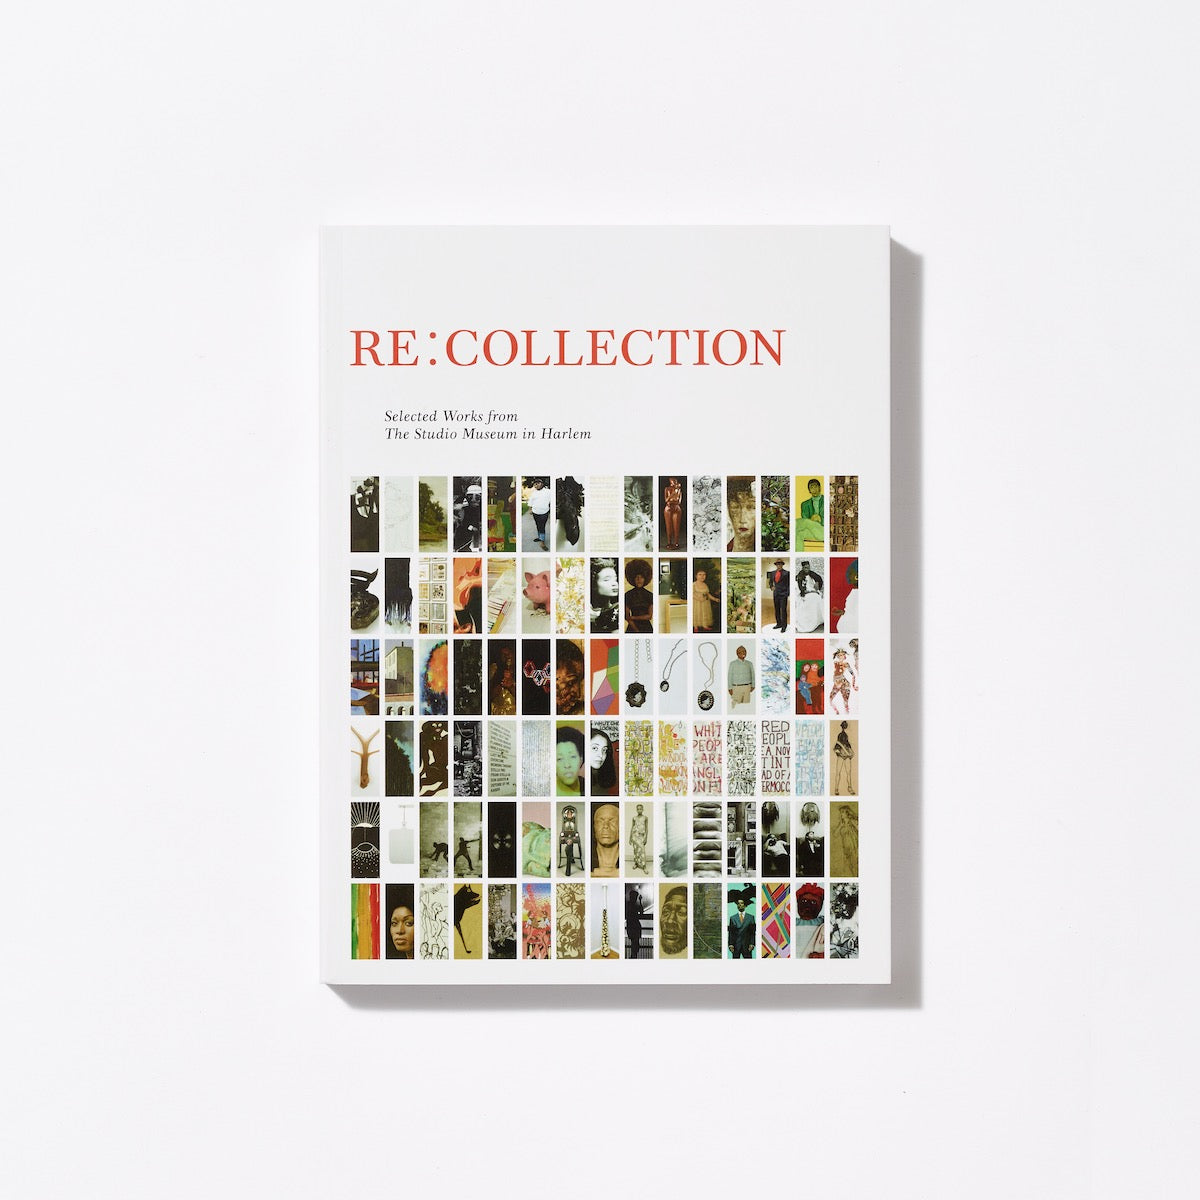 Re:Collection: Selected Works from The Studio Museum in Harlem